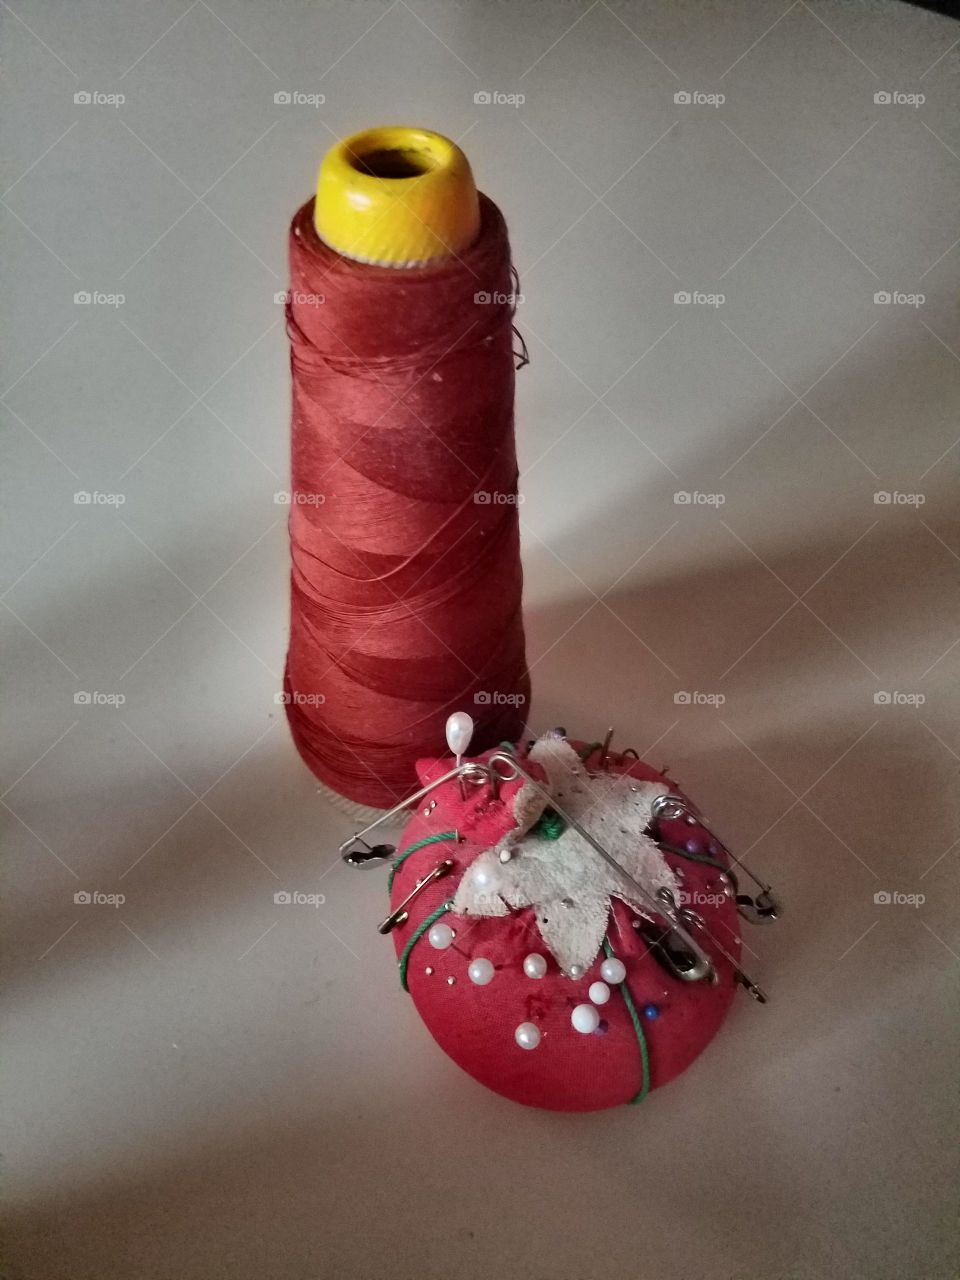 Spool of red thread & red pin cushion full of pins.